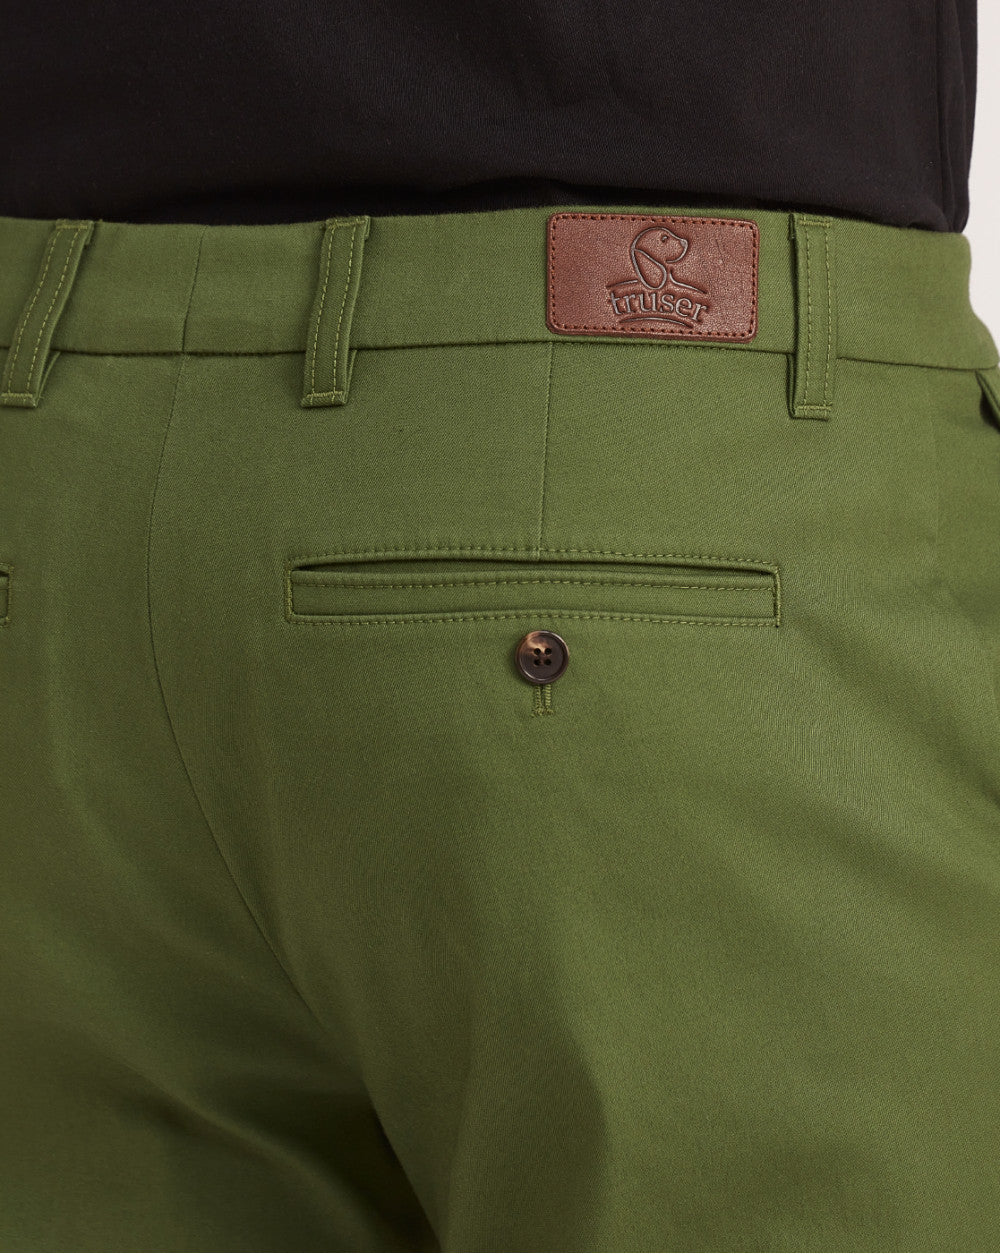 Regular Fit Fit Luxe Chinos - Chive Green